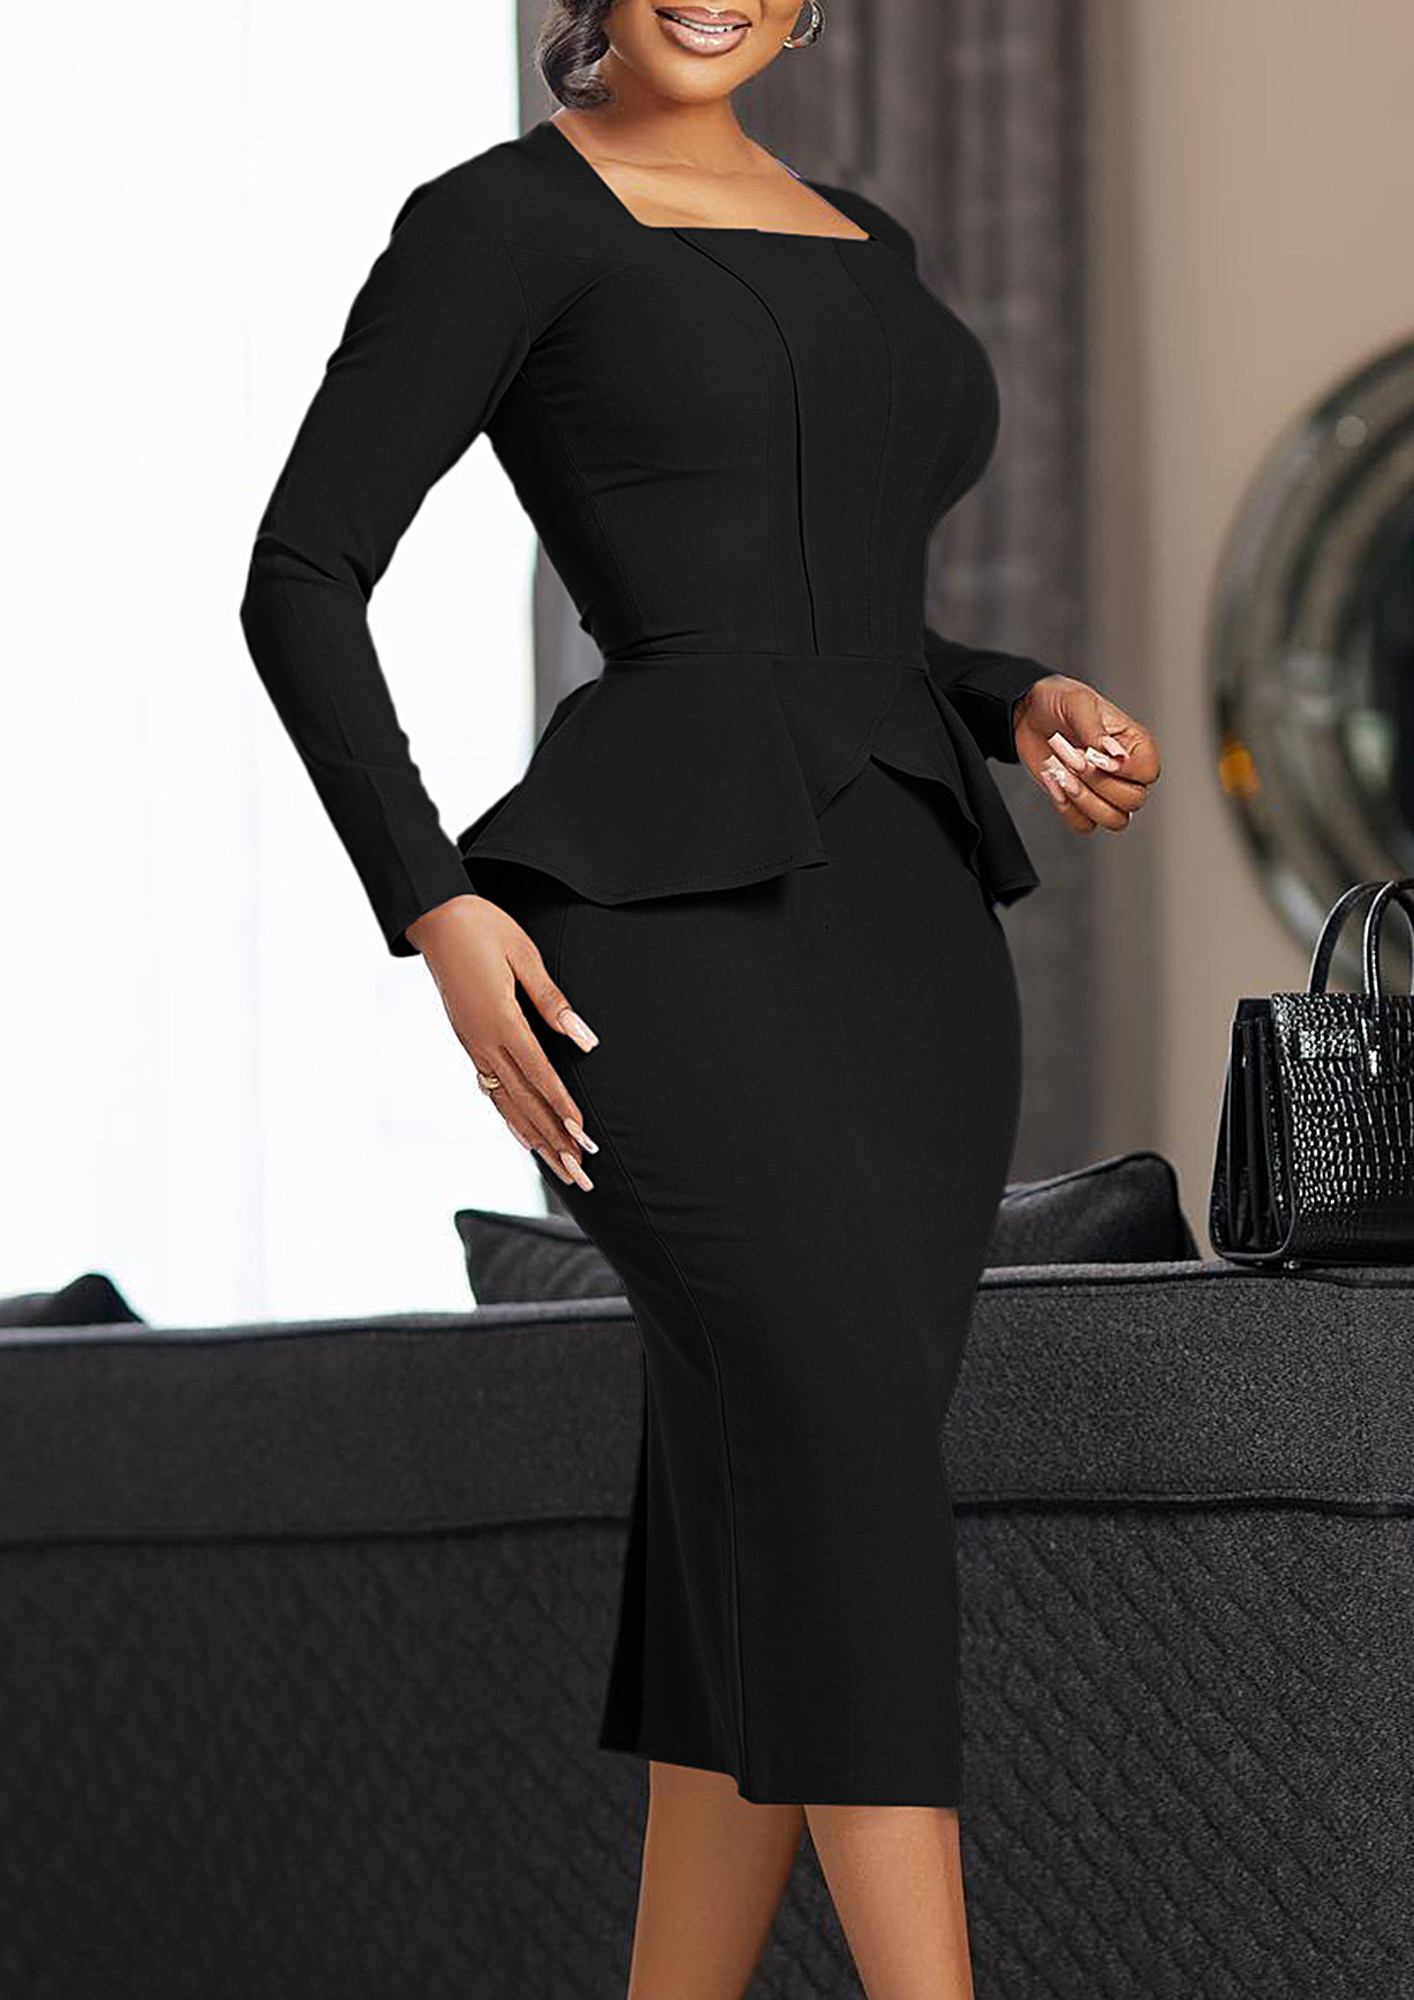 Black Peplum Mermaid Mother Dress For Wedding With Long Sleeves And Lace  Detailing Plus Size Wedding Guest Gown With Beaded Half Sleeve Gro2570 From  Henryr, $104.53 | DHgate.Com